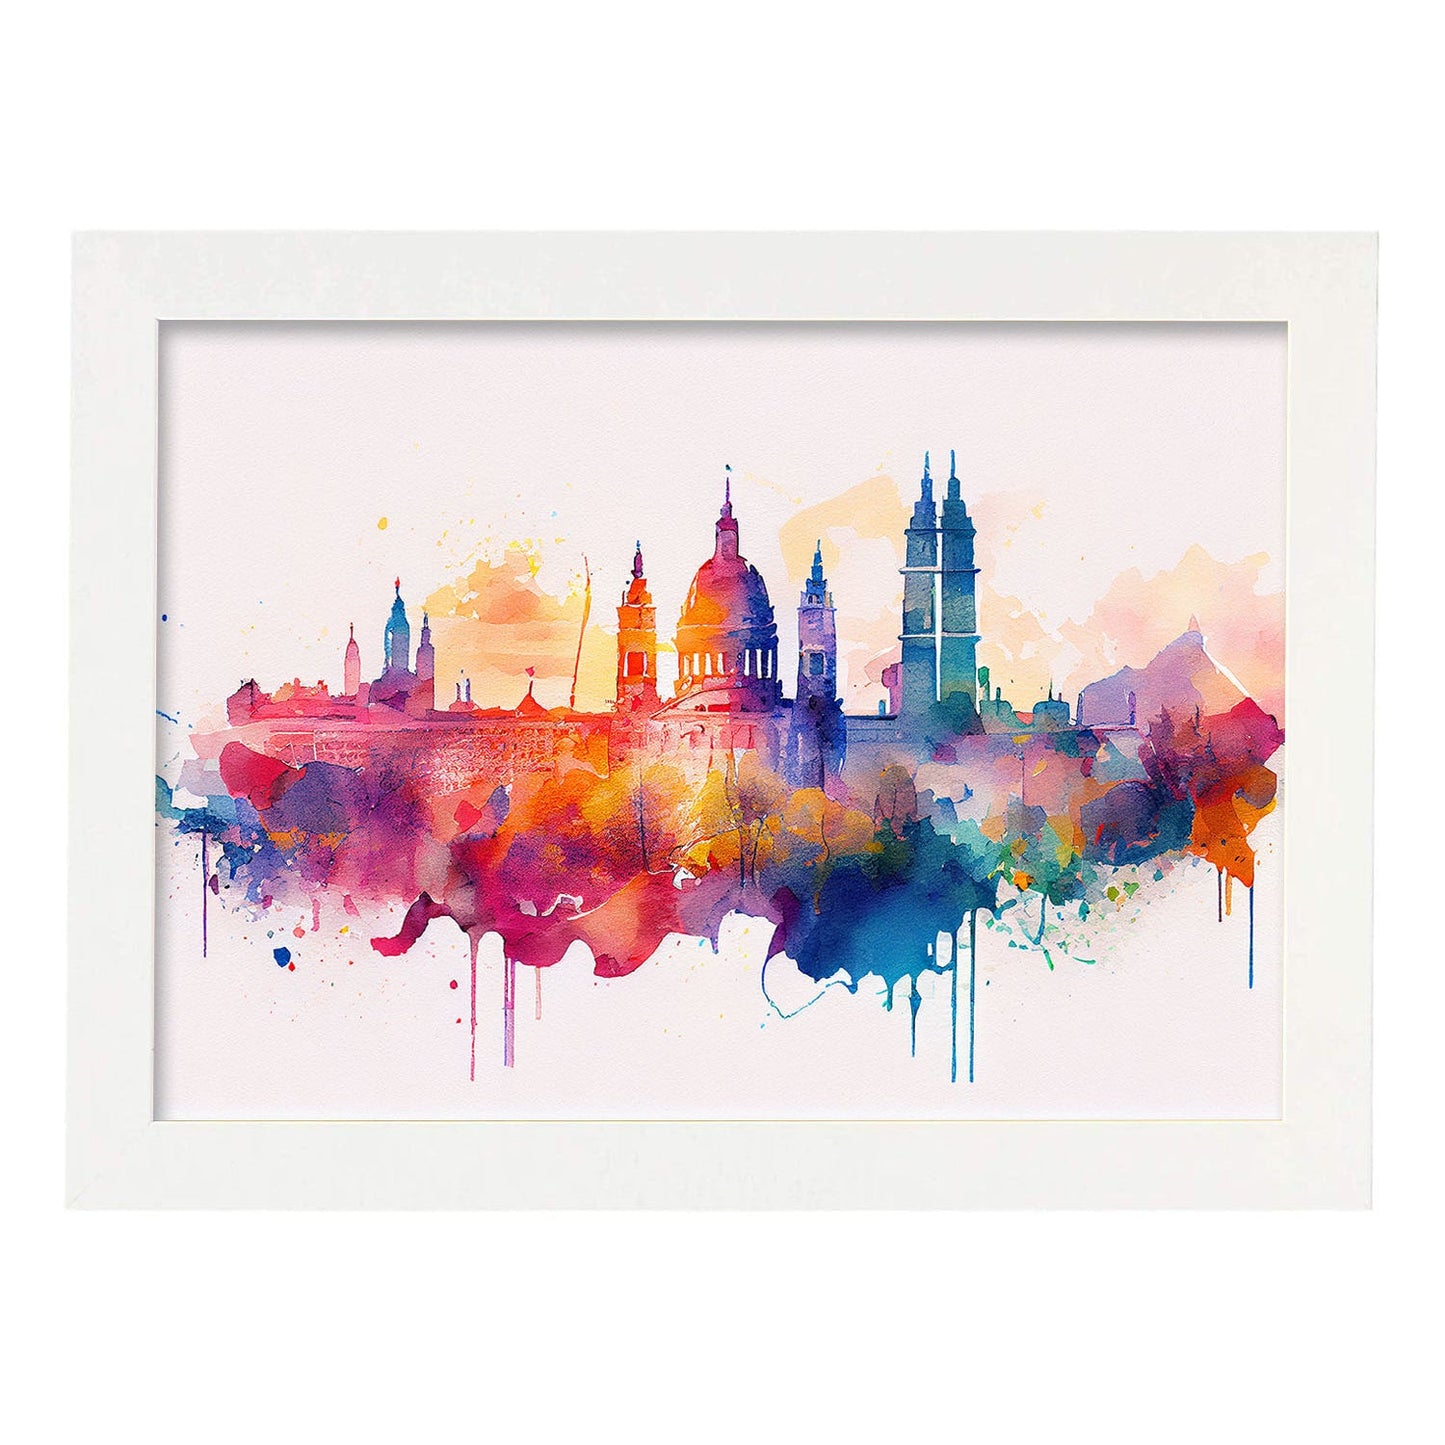 Nacnic watercolor of a skyline of the city of Madrid_4. Aesthetic Wall Art Prints for Bedroom or Living Room Design.-Artwork-Nacnic-A4-Marco Blanco-Nacnic Estudio SL